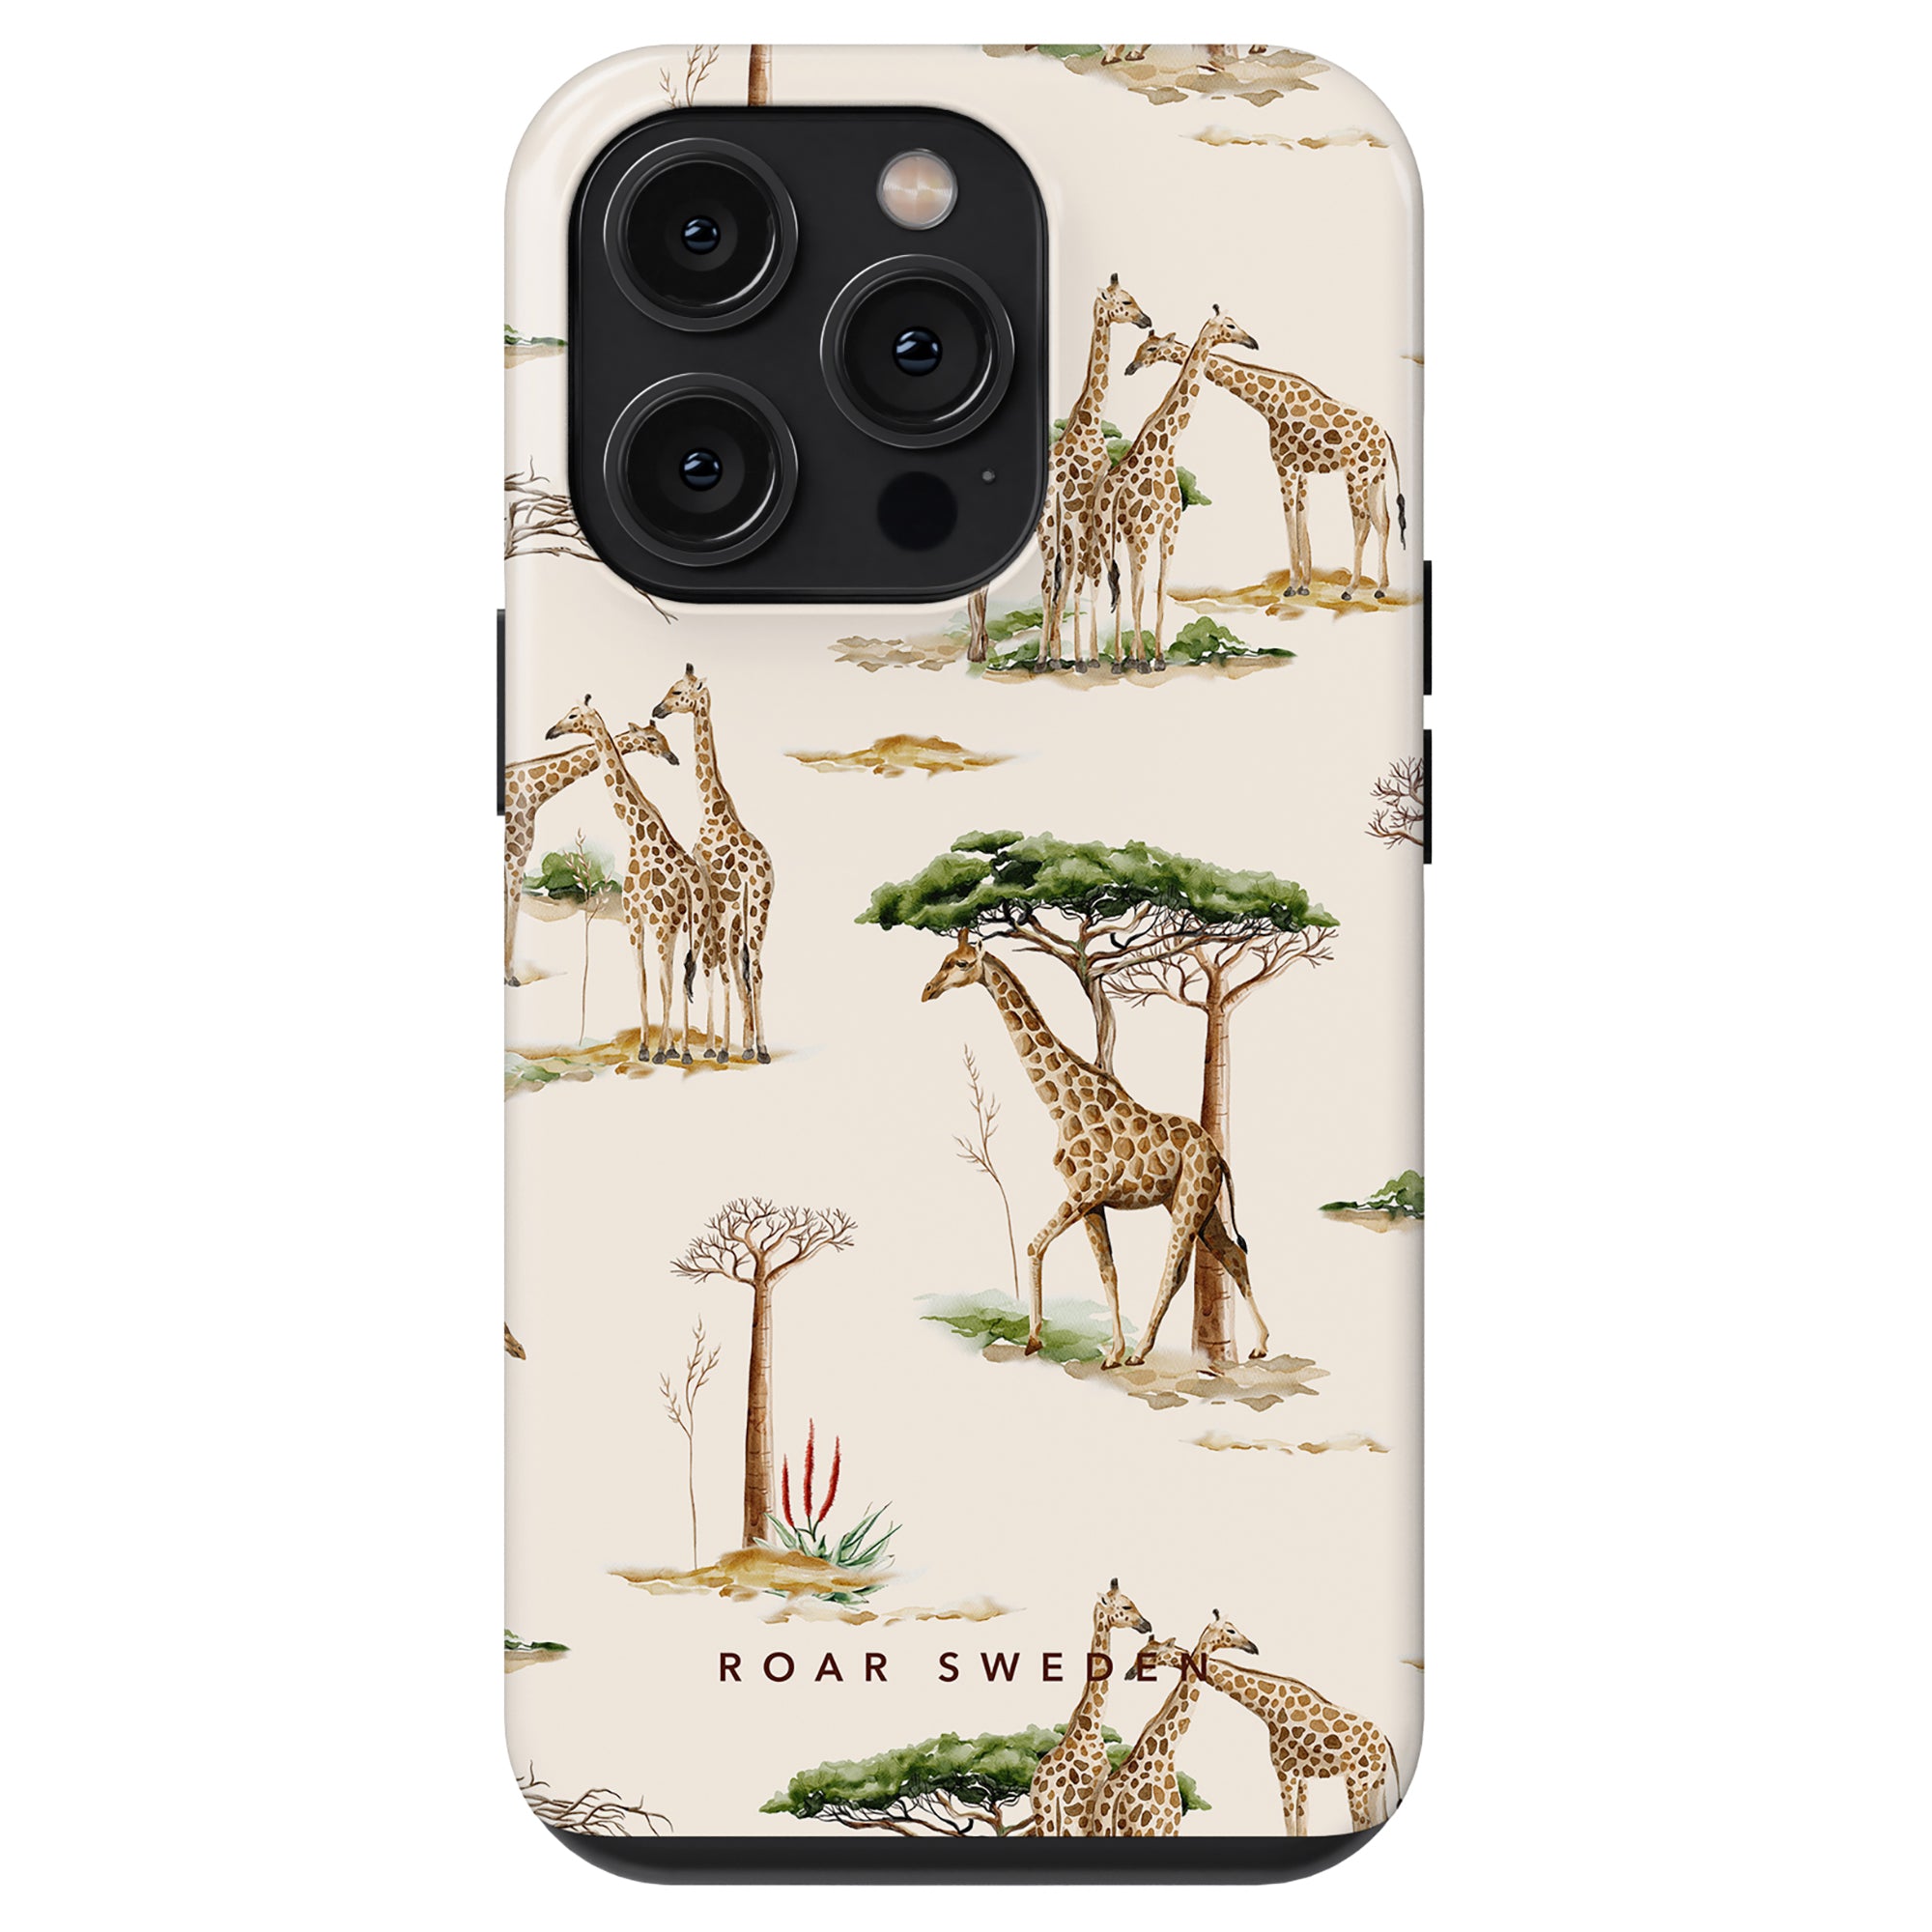 This stylish smartphone case, part of our Safari Collection, showcases an illustration of multiple giraffes and trees on a beige background. The words "ROAR SWEET" are subtly printed at the bottom, making it both functional and fashionable—a perfect Giraffa - Tough Case for your mobile needs.